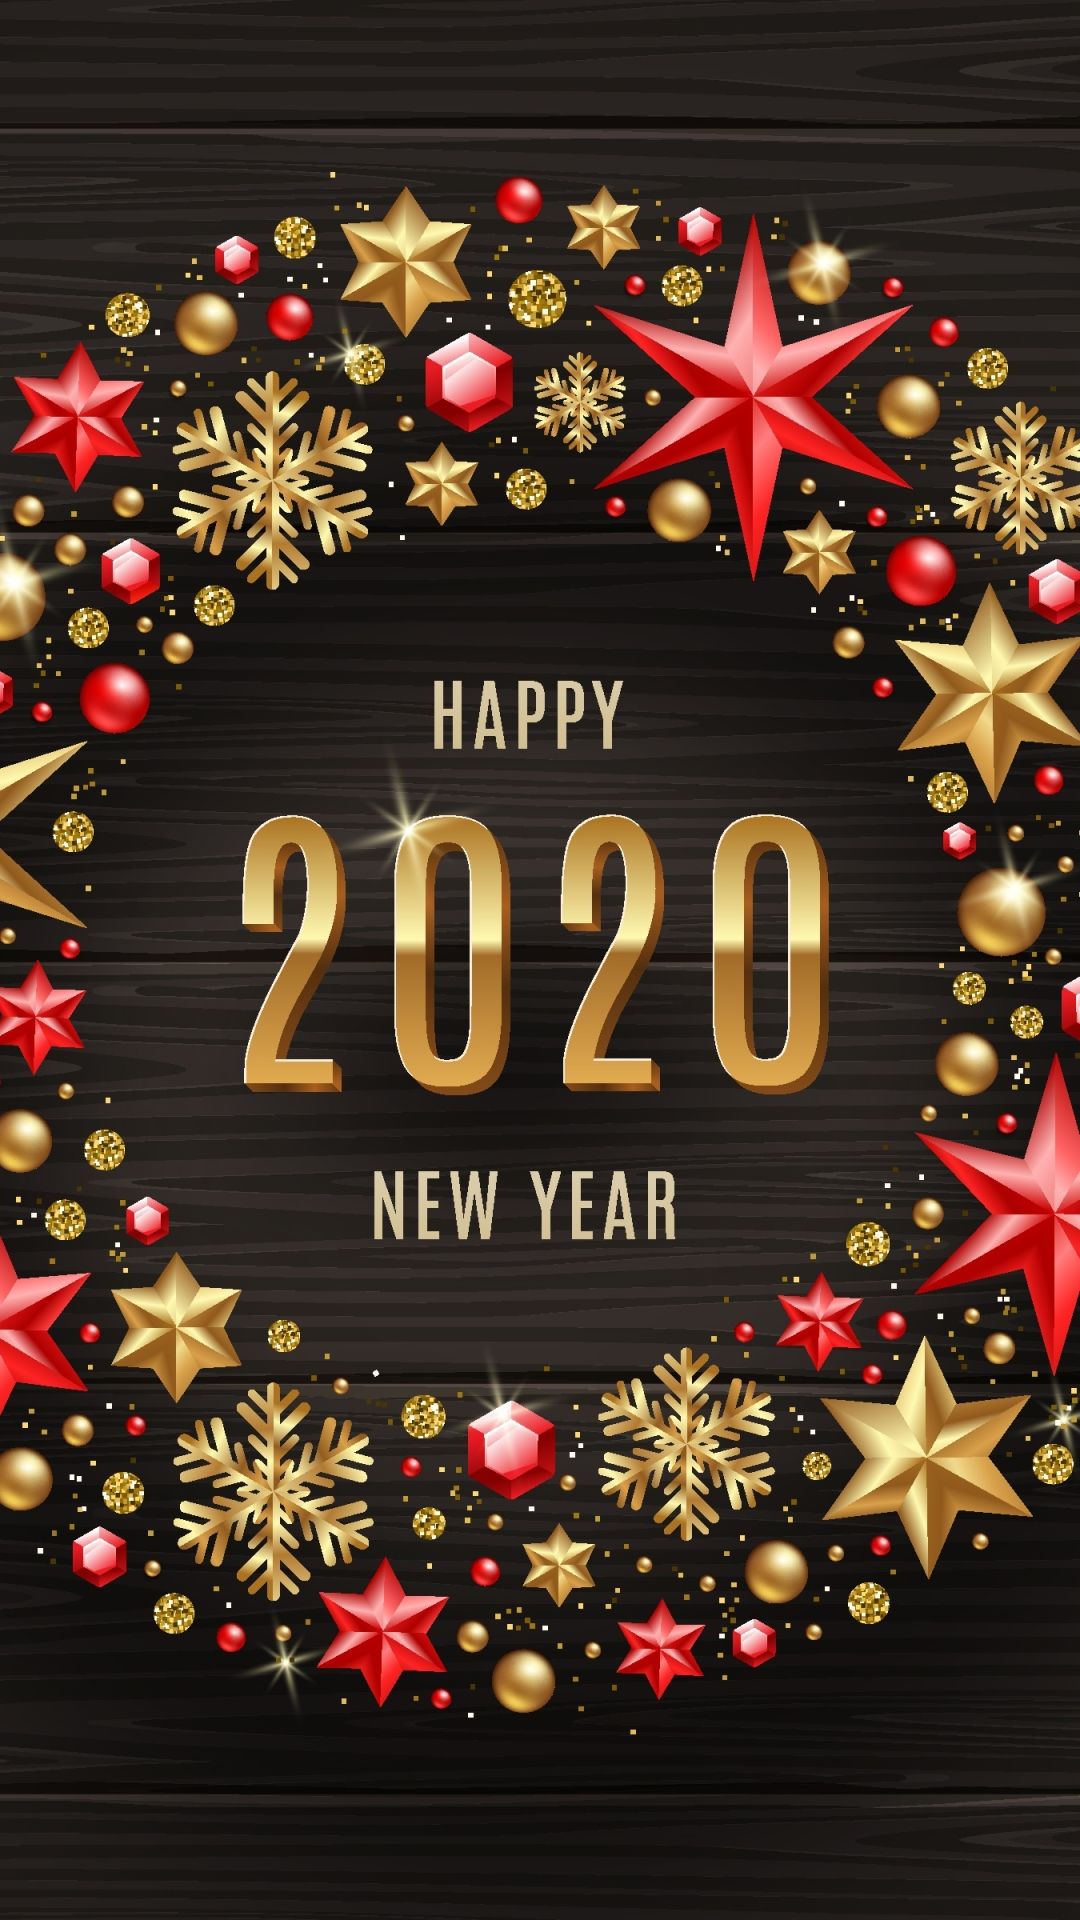 Download Happy New Year 2020 Wishes Wallpaper for your Android